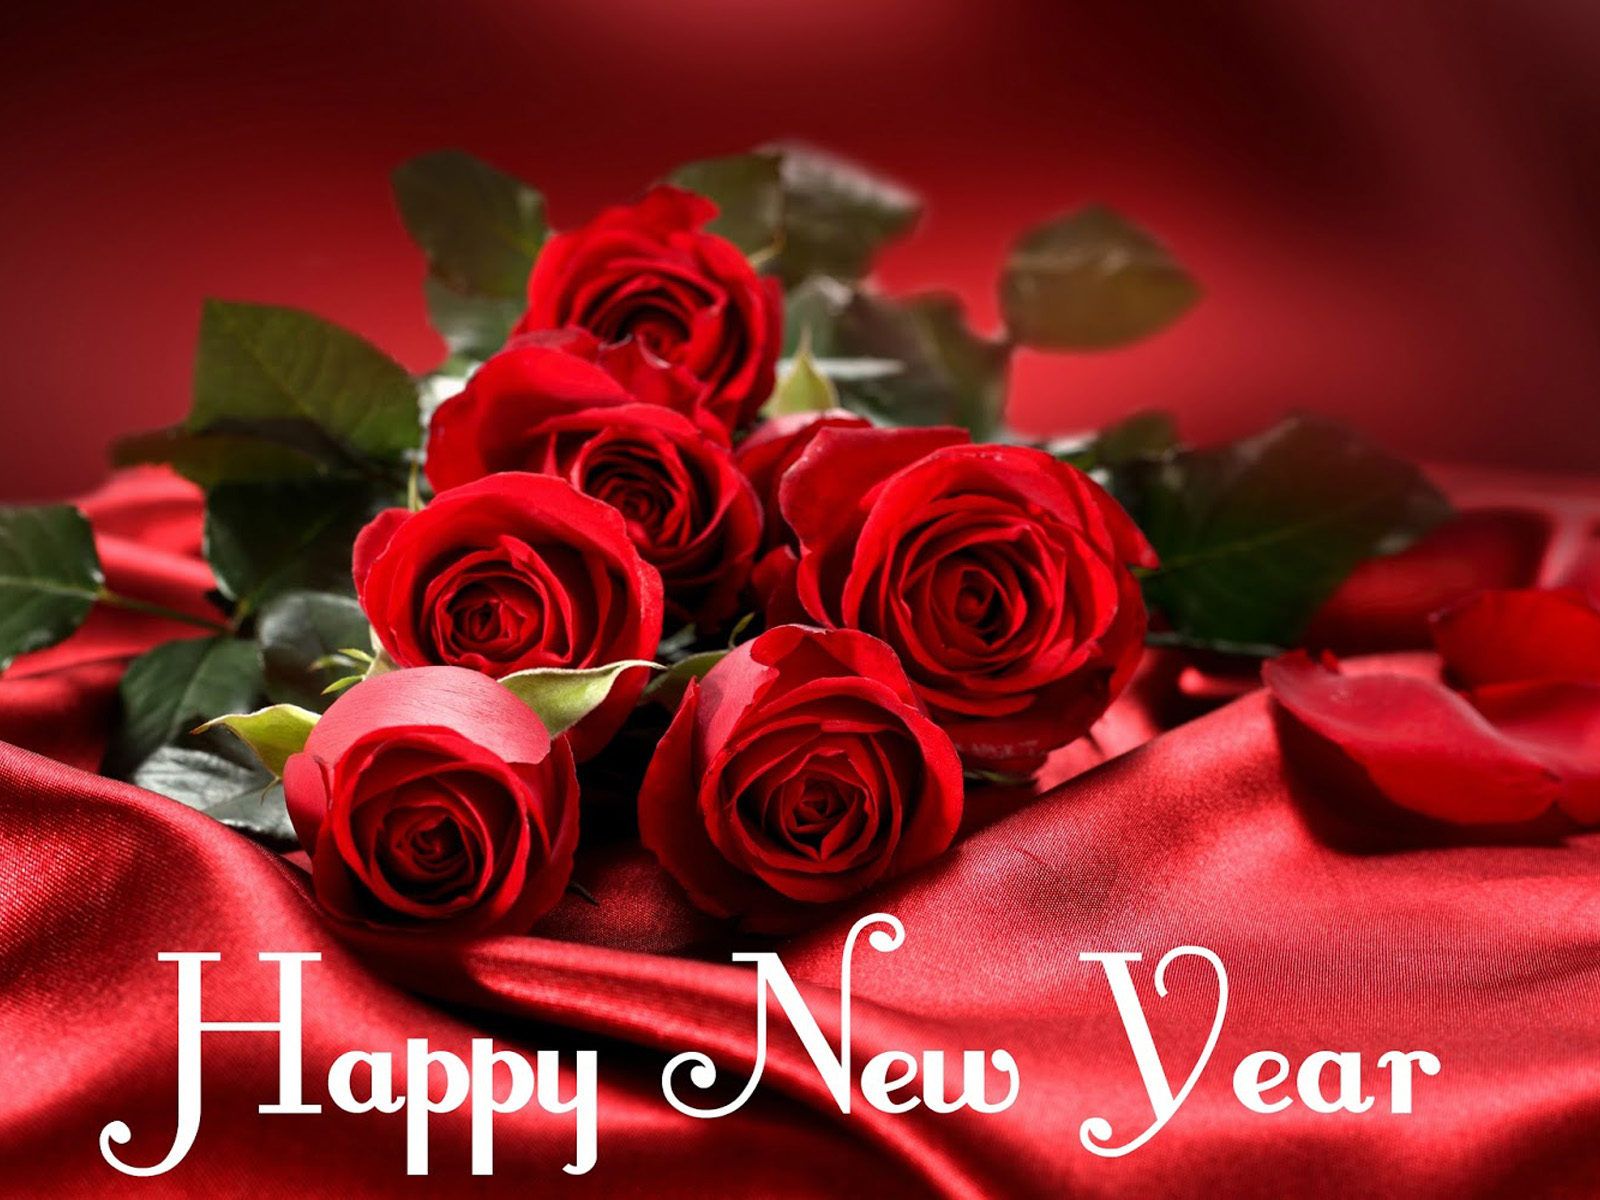 Happy New Year Red Roses Flower Image 2021 Greeting Card 1920x1200, Wallpaper13.com